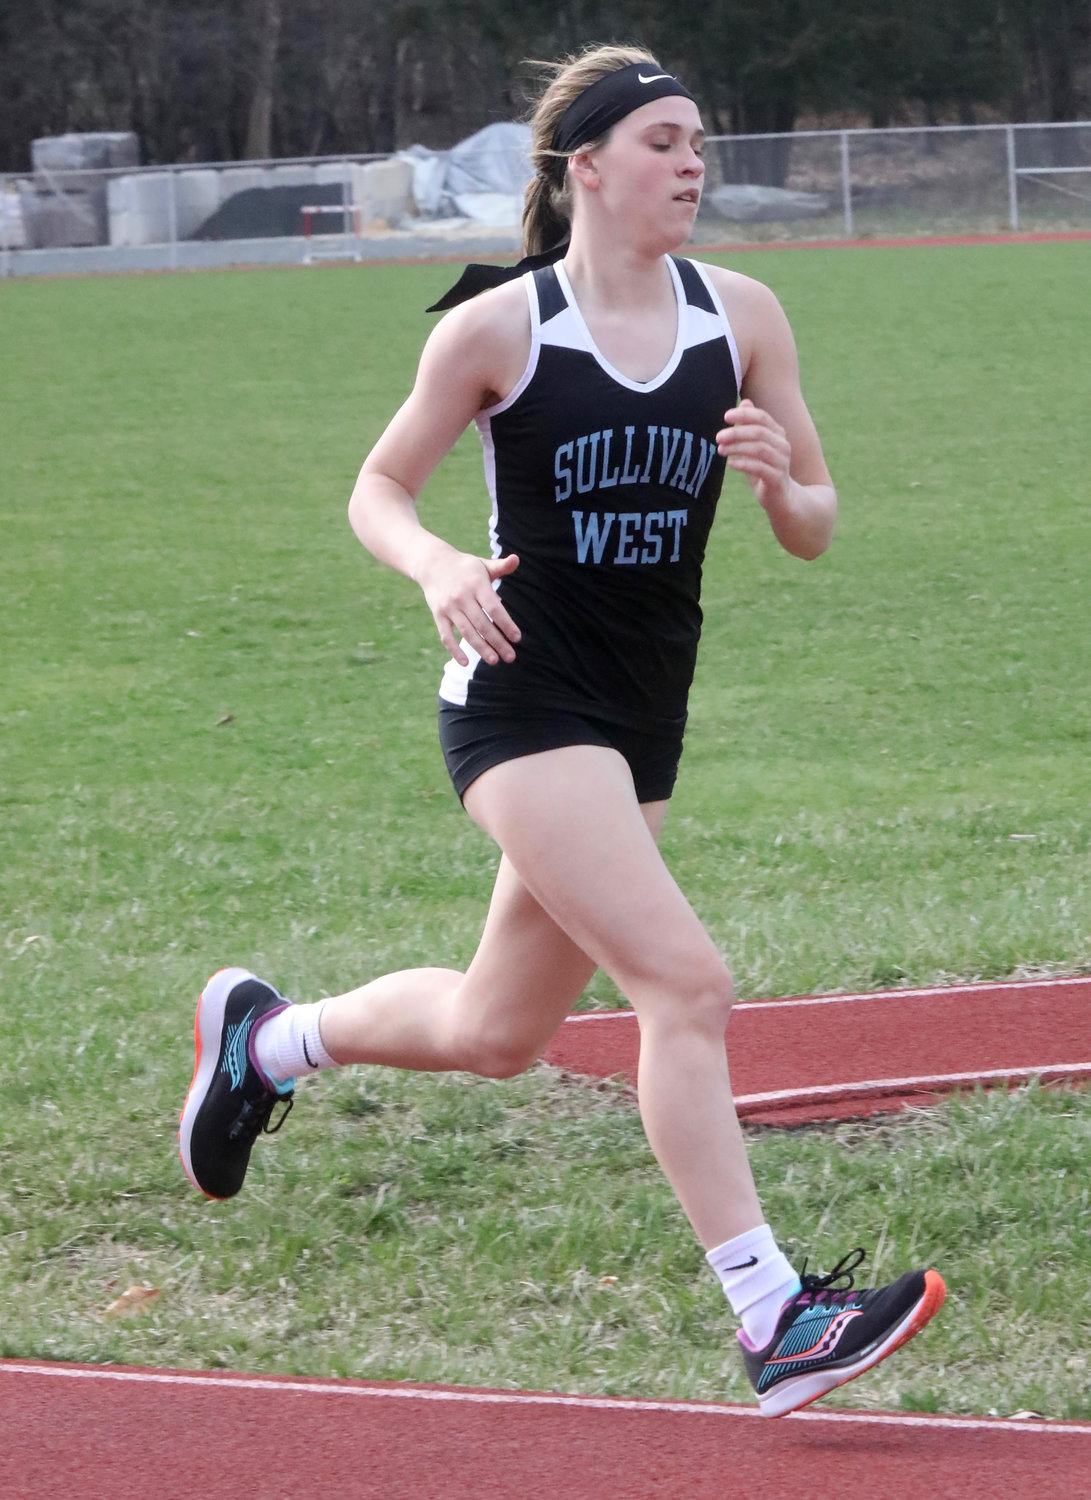 Sullivan West’s Grace Boyd helped propel the Lady Westies to the big win over Tri-Valley. She ran a leg in the winning 4x800 relay and won the 1500, 800 and 3000.